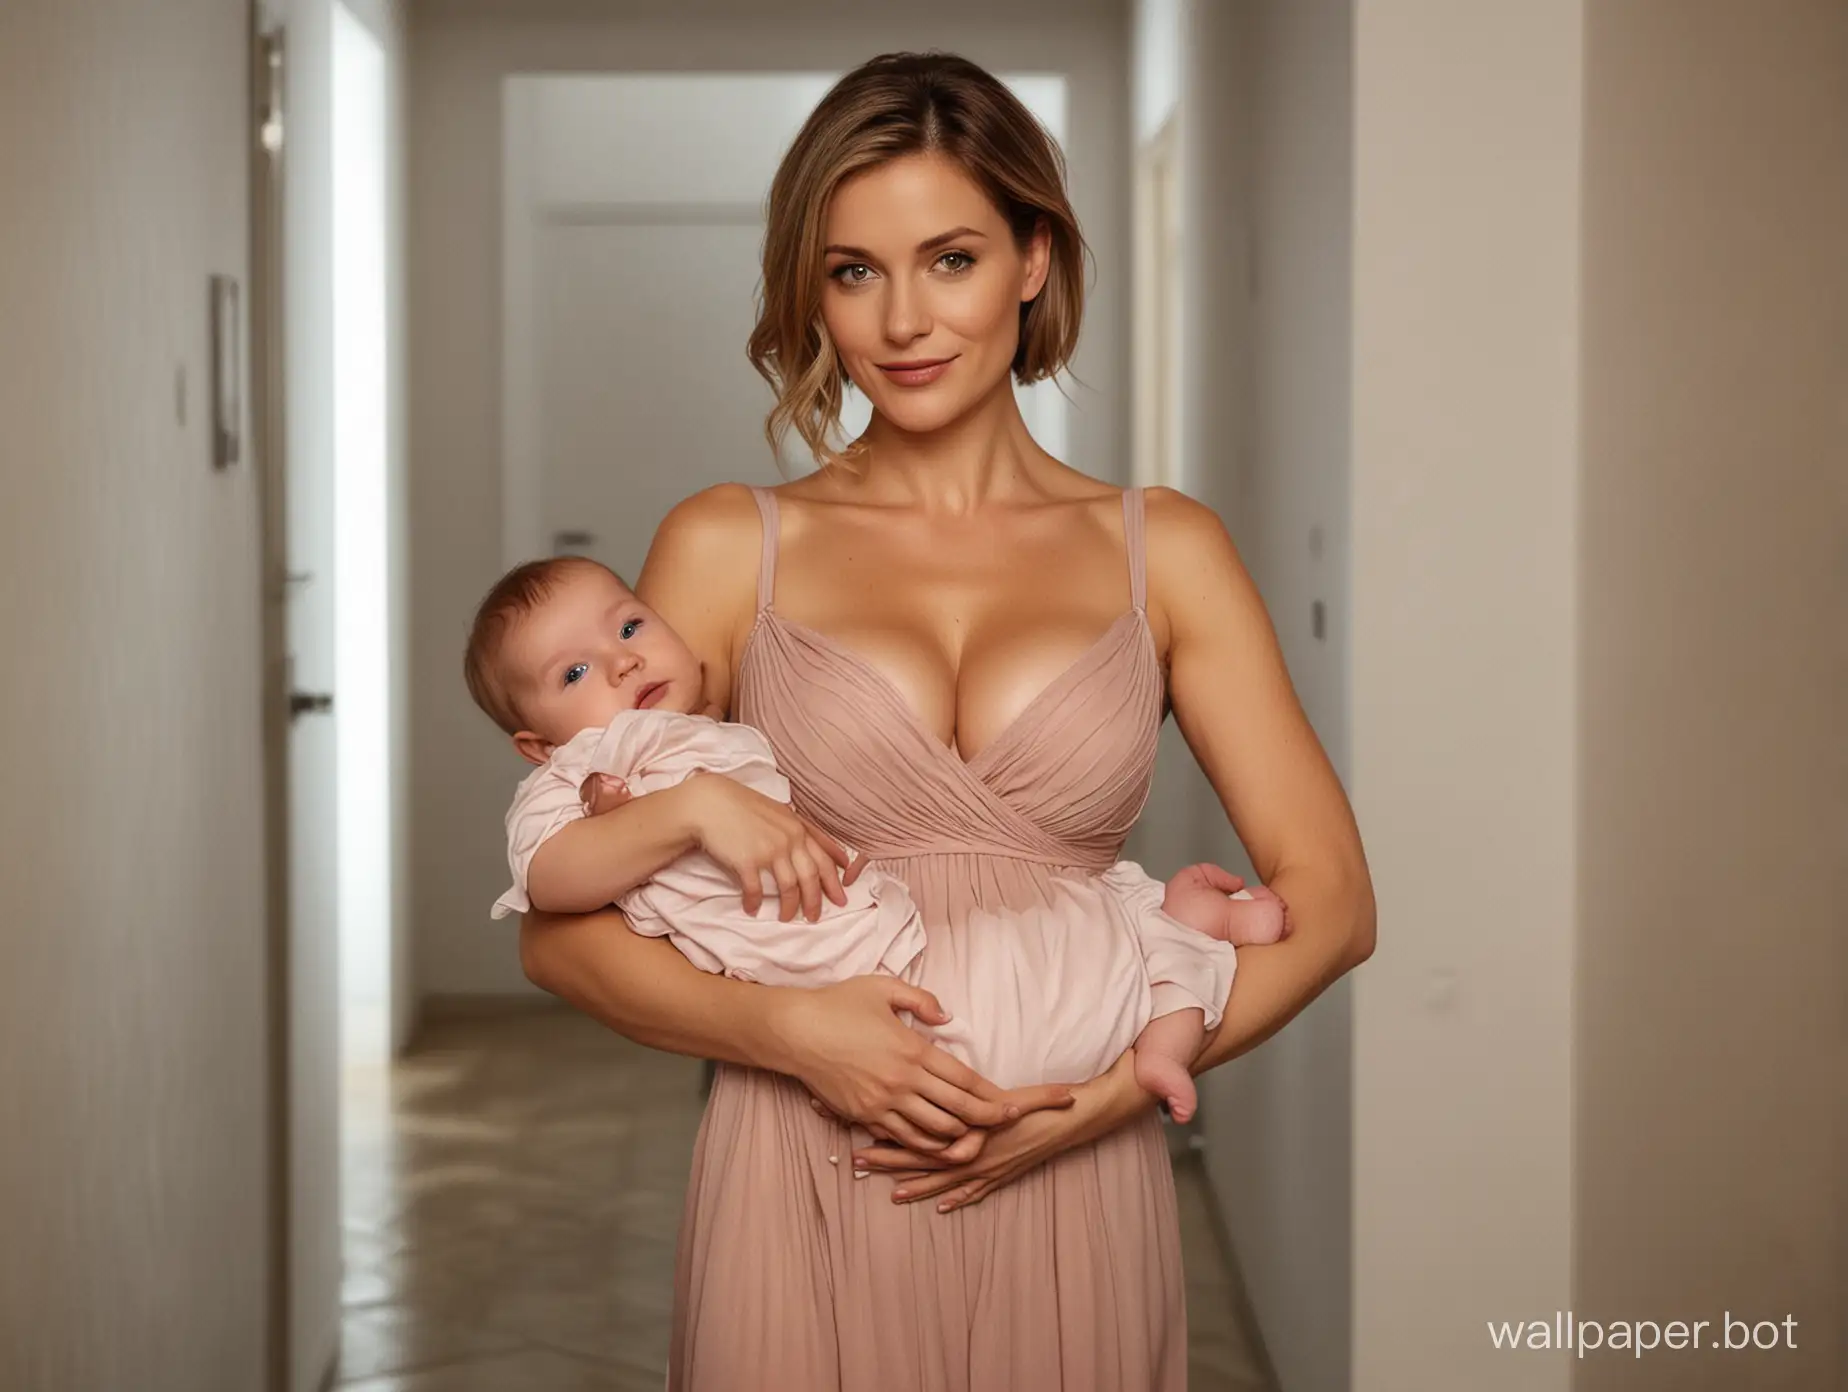 in a german hallway, a 30-years-old higly aroused mother holding her baby daughter in arms, standing in the entrance, showcasing her baby to the viewer. Split Leg Evening Dress. very seductive and very lustful facial expression. getting a climax. supermodel figure, narrow cheekbones. show full body. erotic atmosphere. daytime, bright light coming from front. very short dark blonde hair. photorealistic.